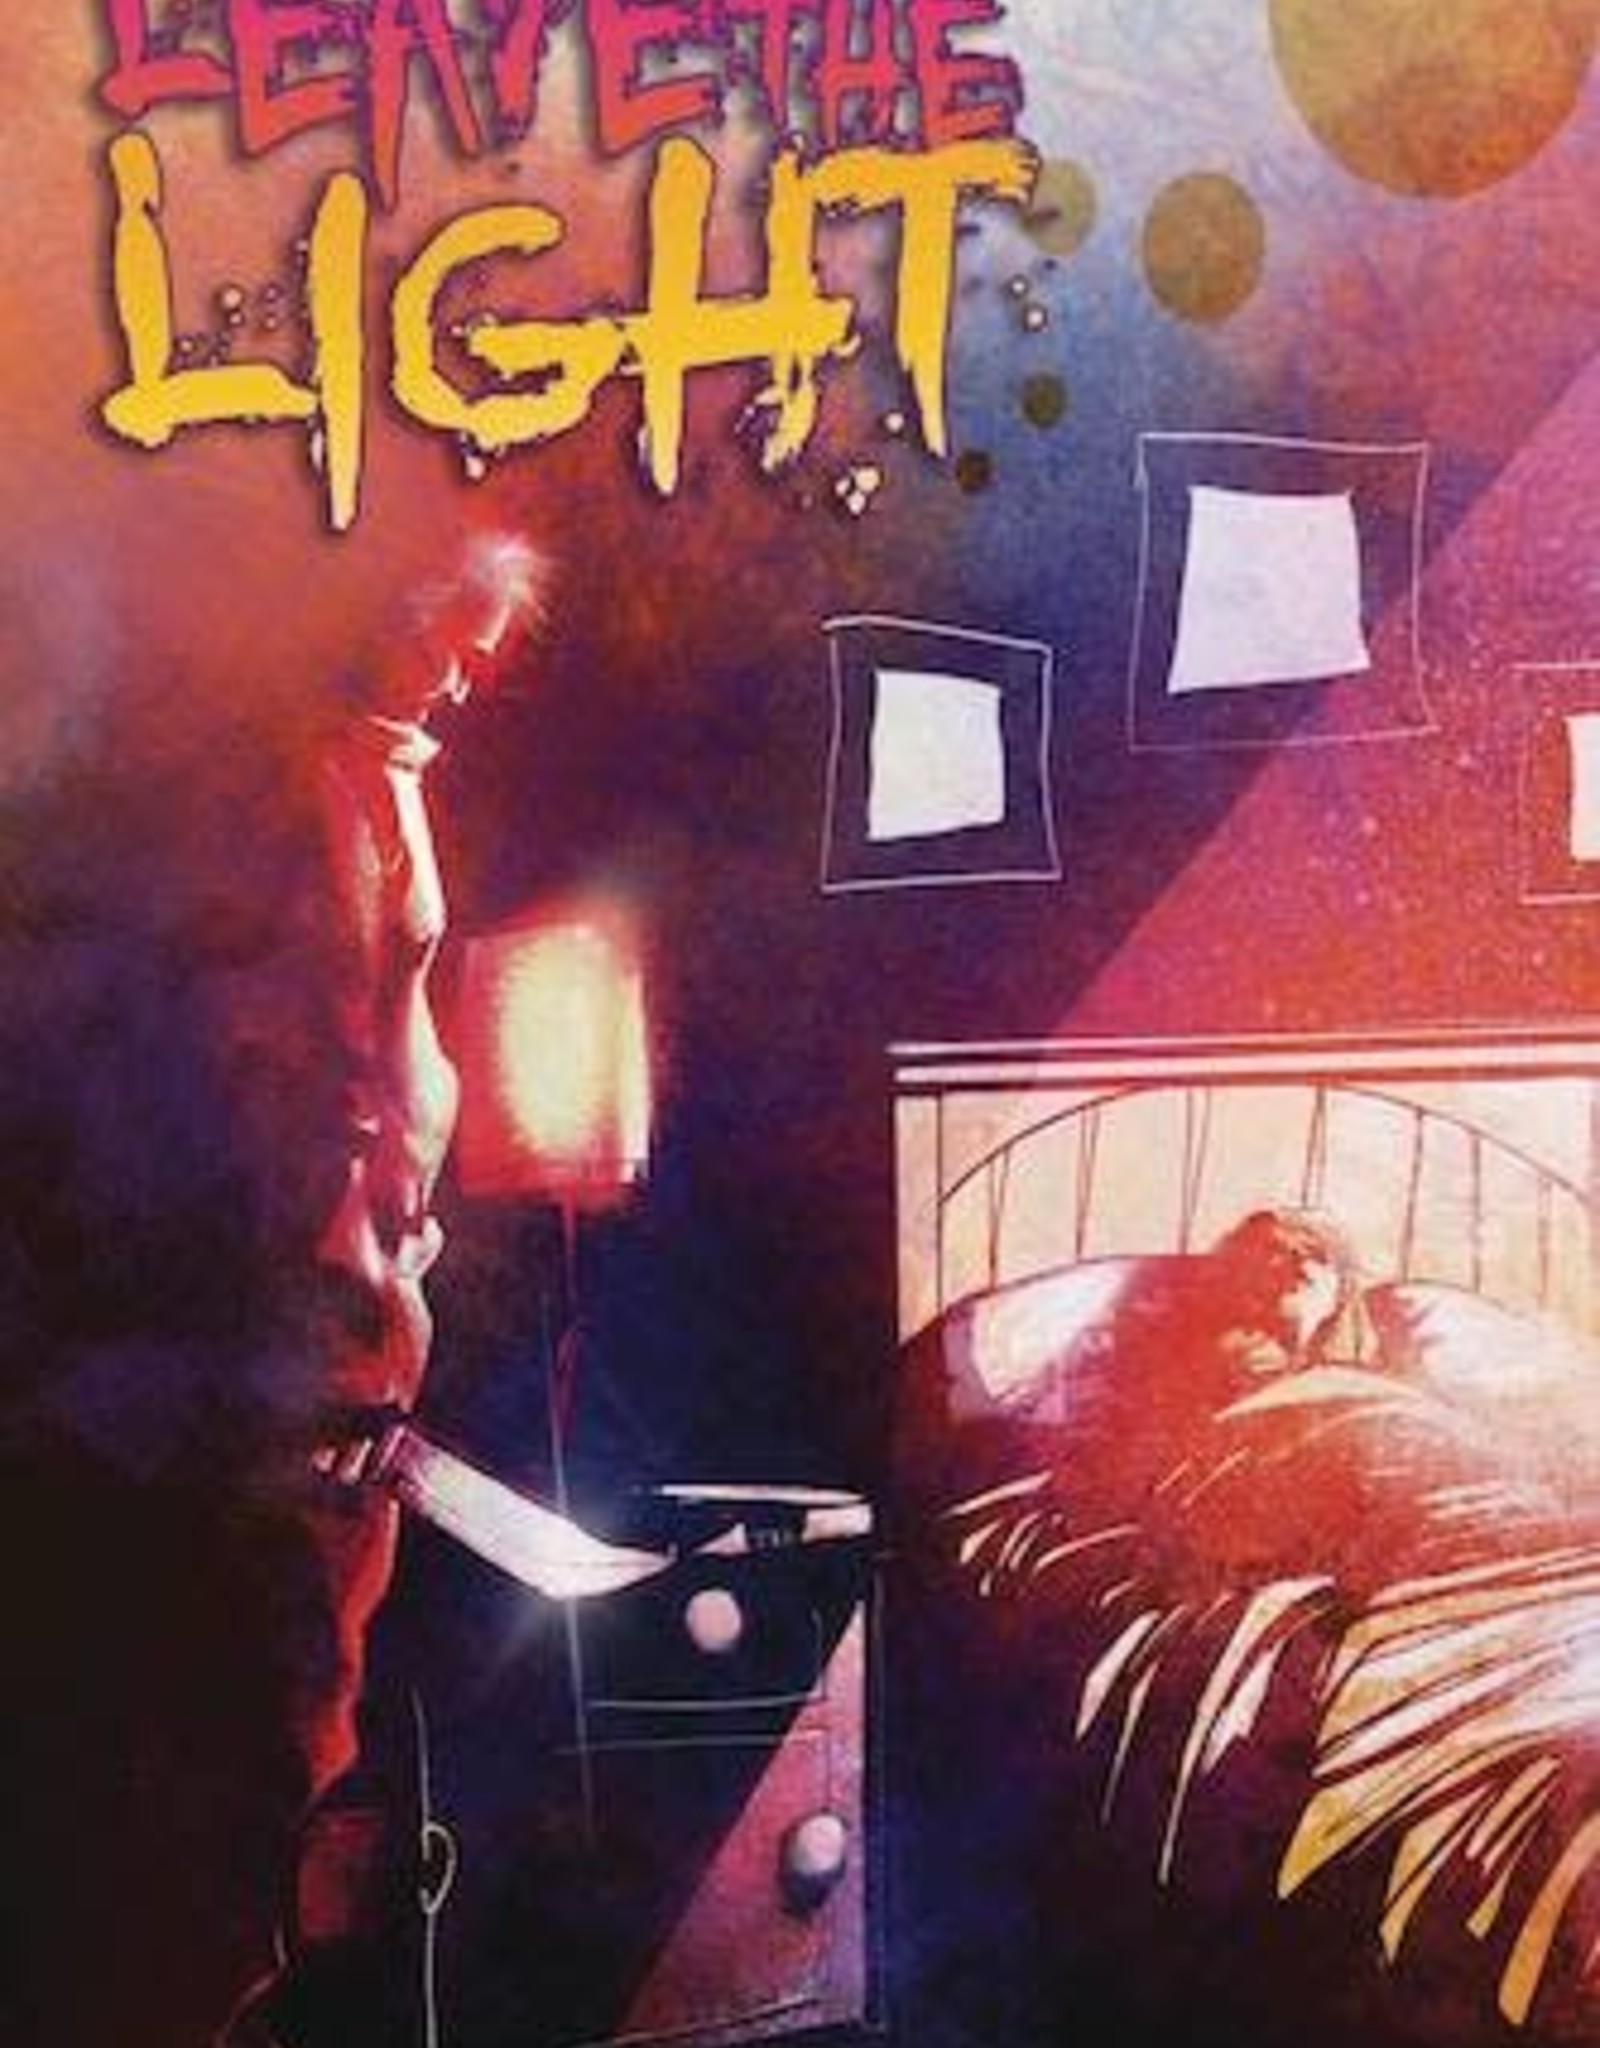 Second Sight Publishing Leave On The Light TP